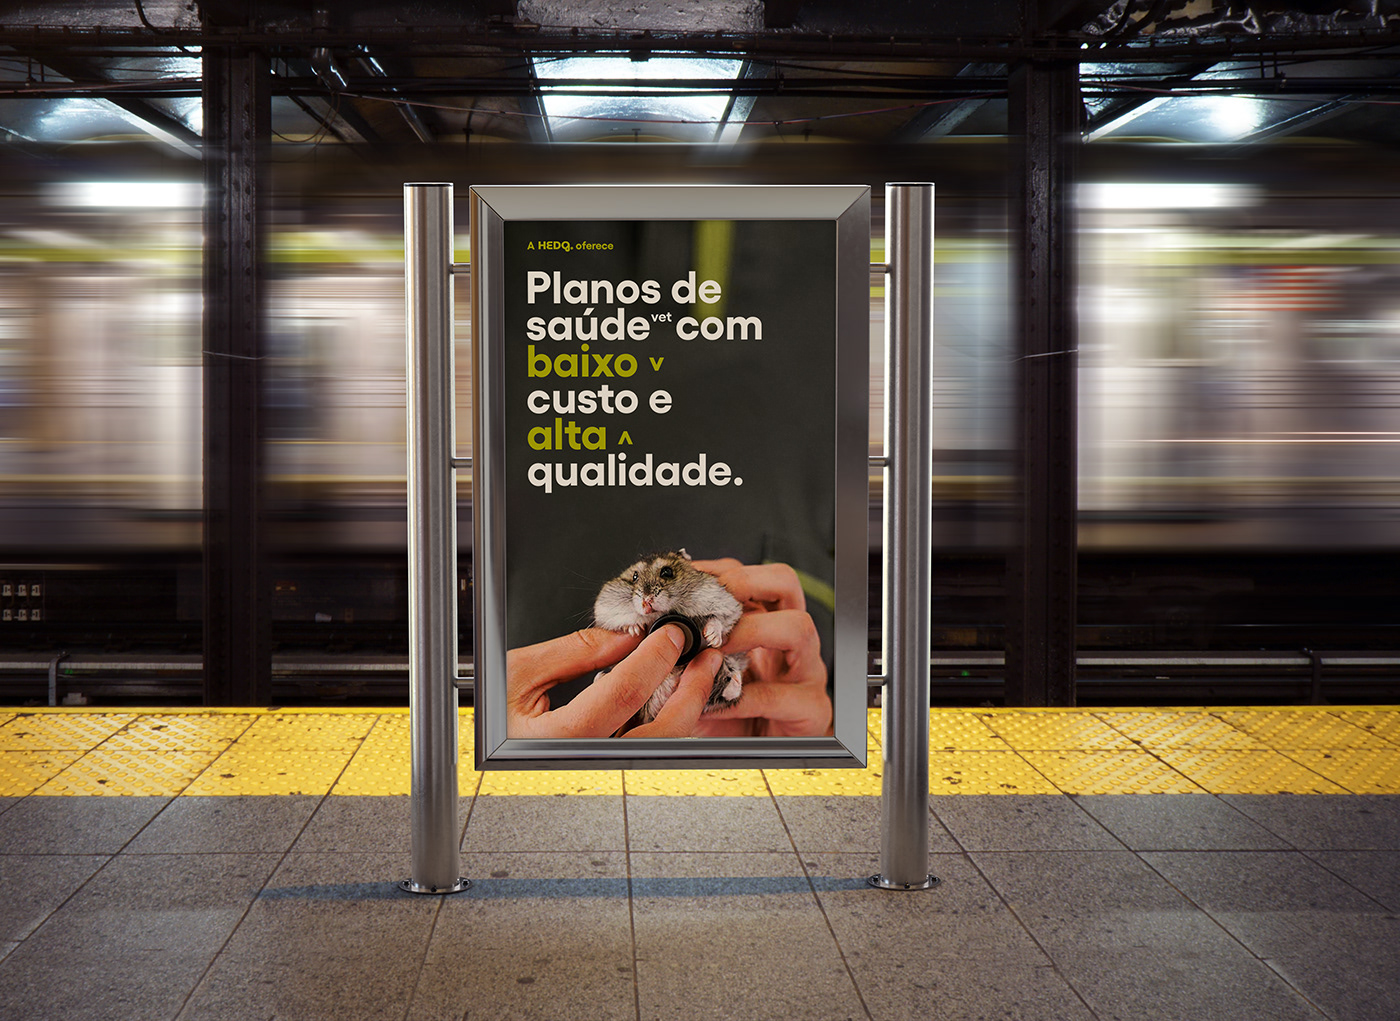 publicity in the subway about health plan for pets